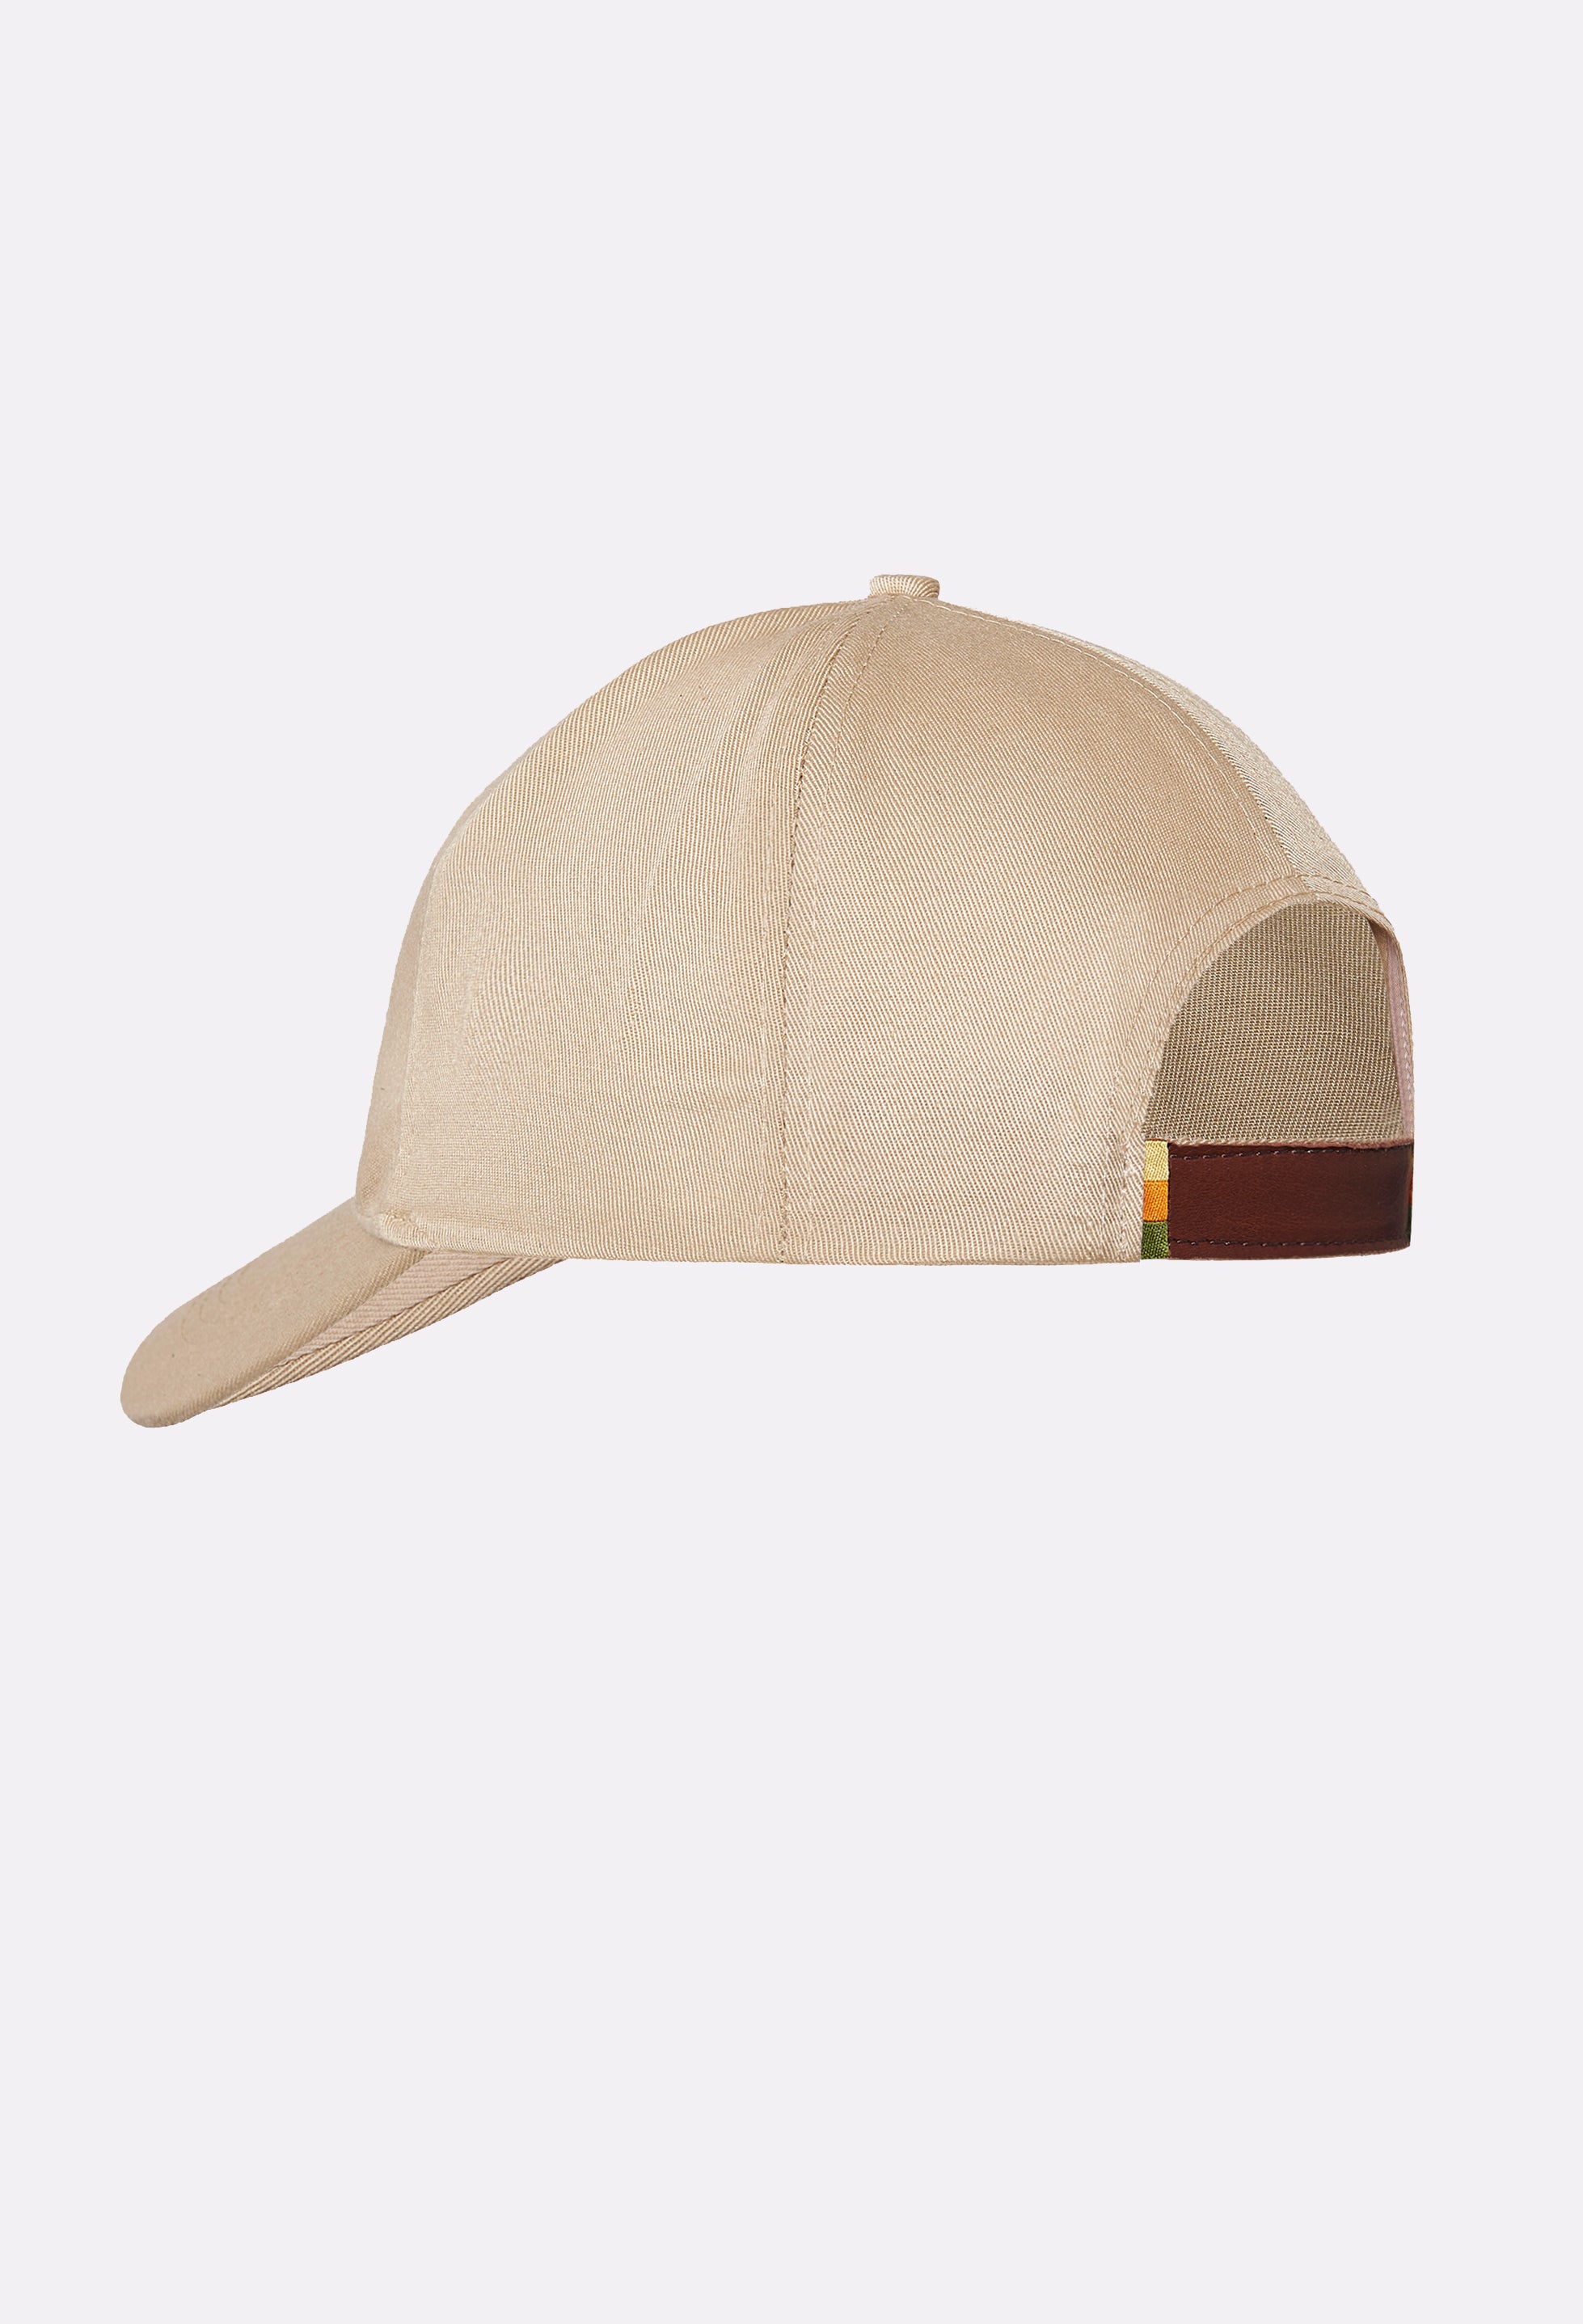 Rear of a Beige Baseball Cap with a Patched Leather Lazaro Logo and a leather adjustable strap.